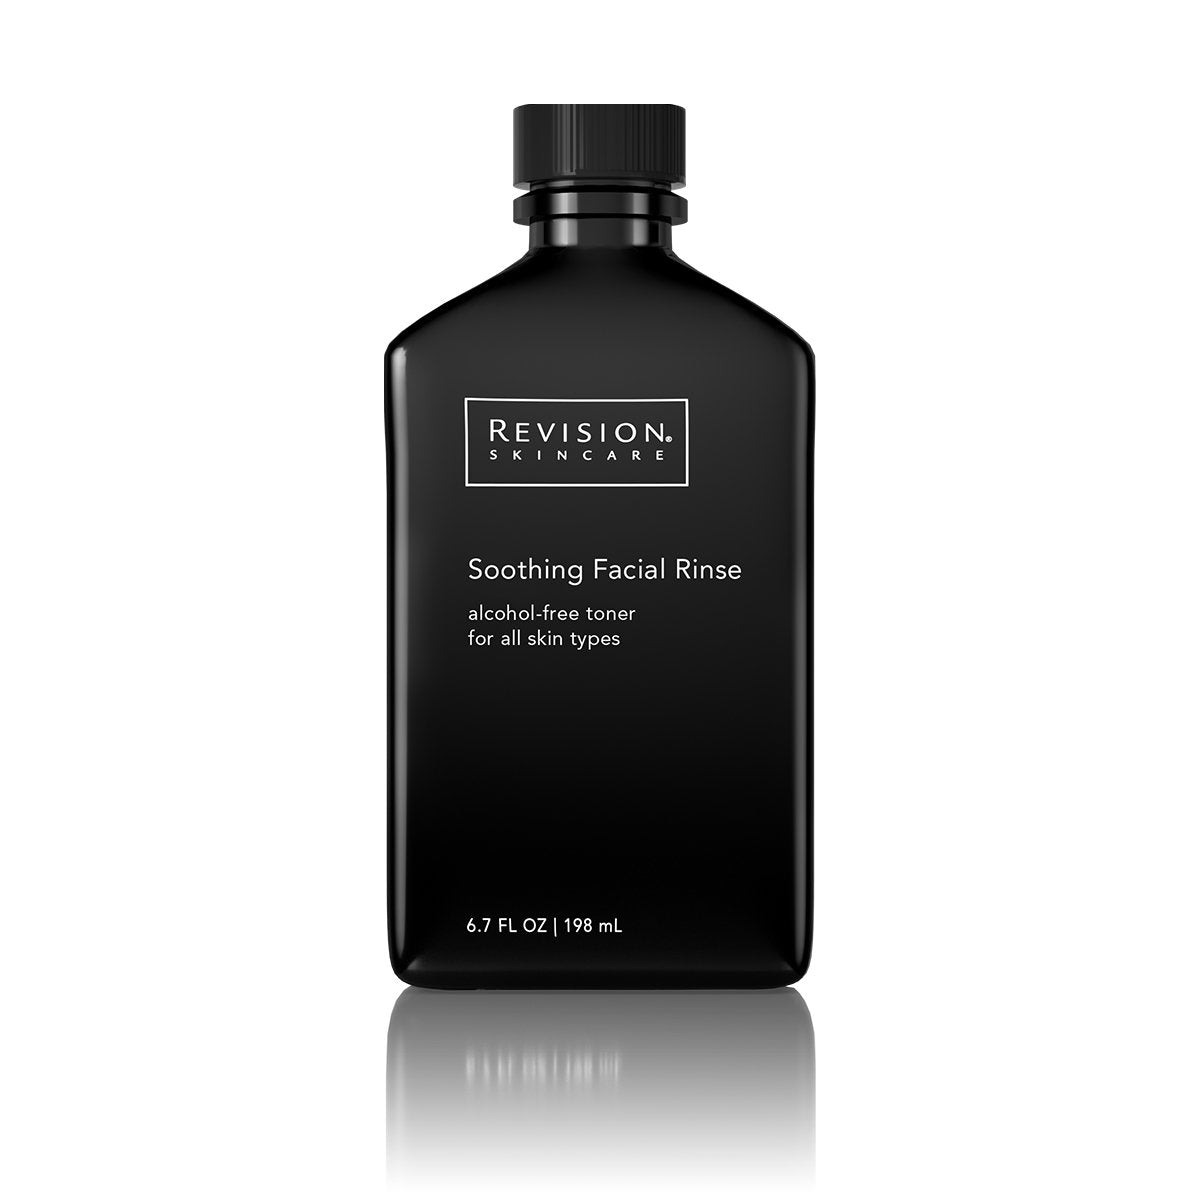 Revision Skincare Soothing Facial Rinse - Totality Skincare